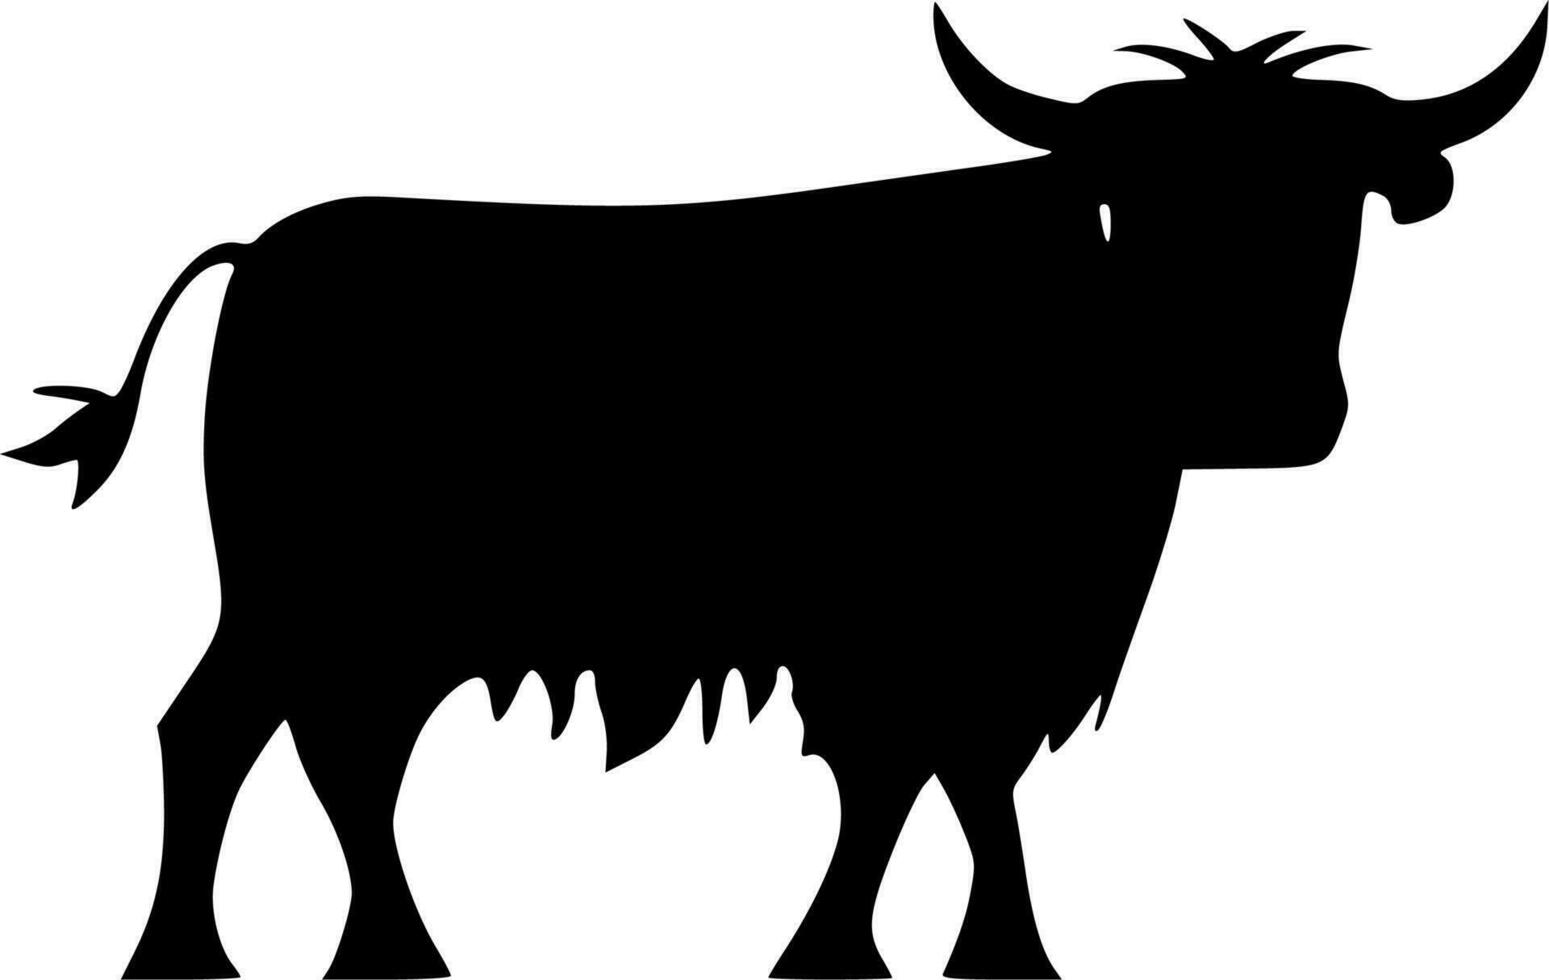 Highland Cow - High Quality Vector Logo - Vector illustration ideal for T-shirt graphic